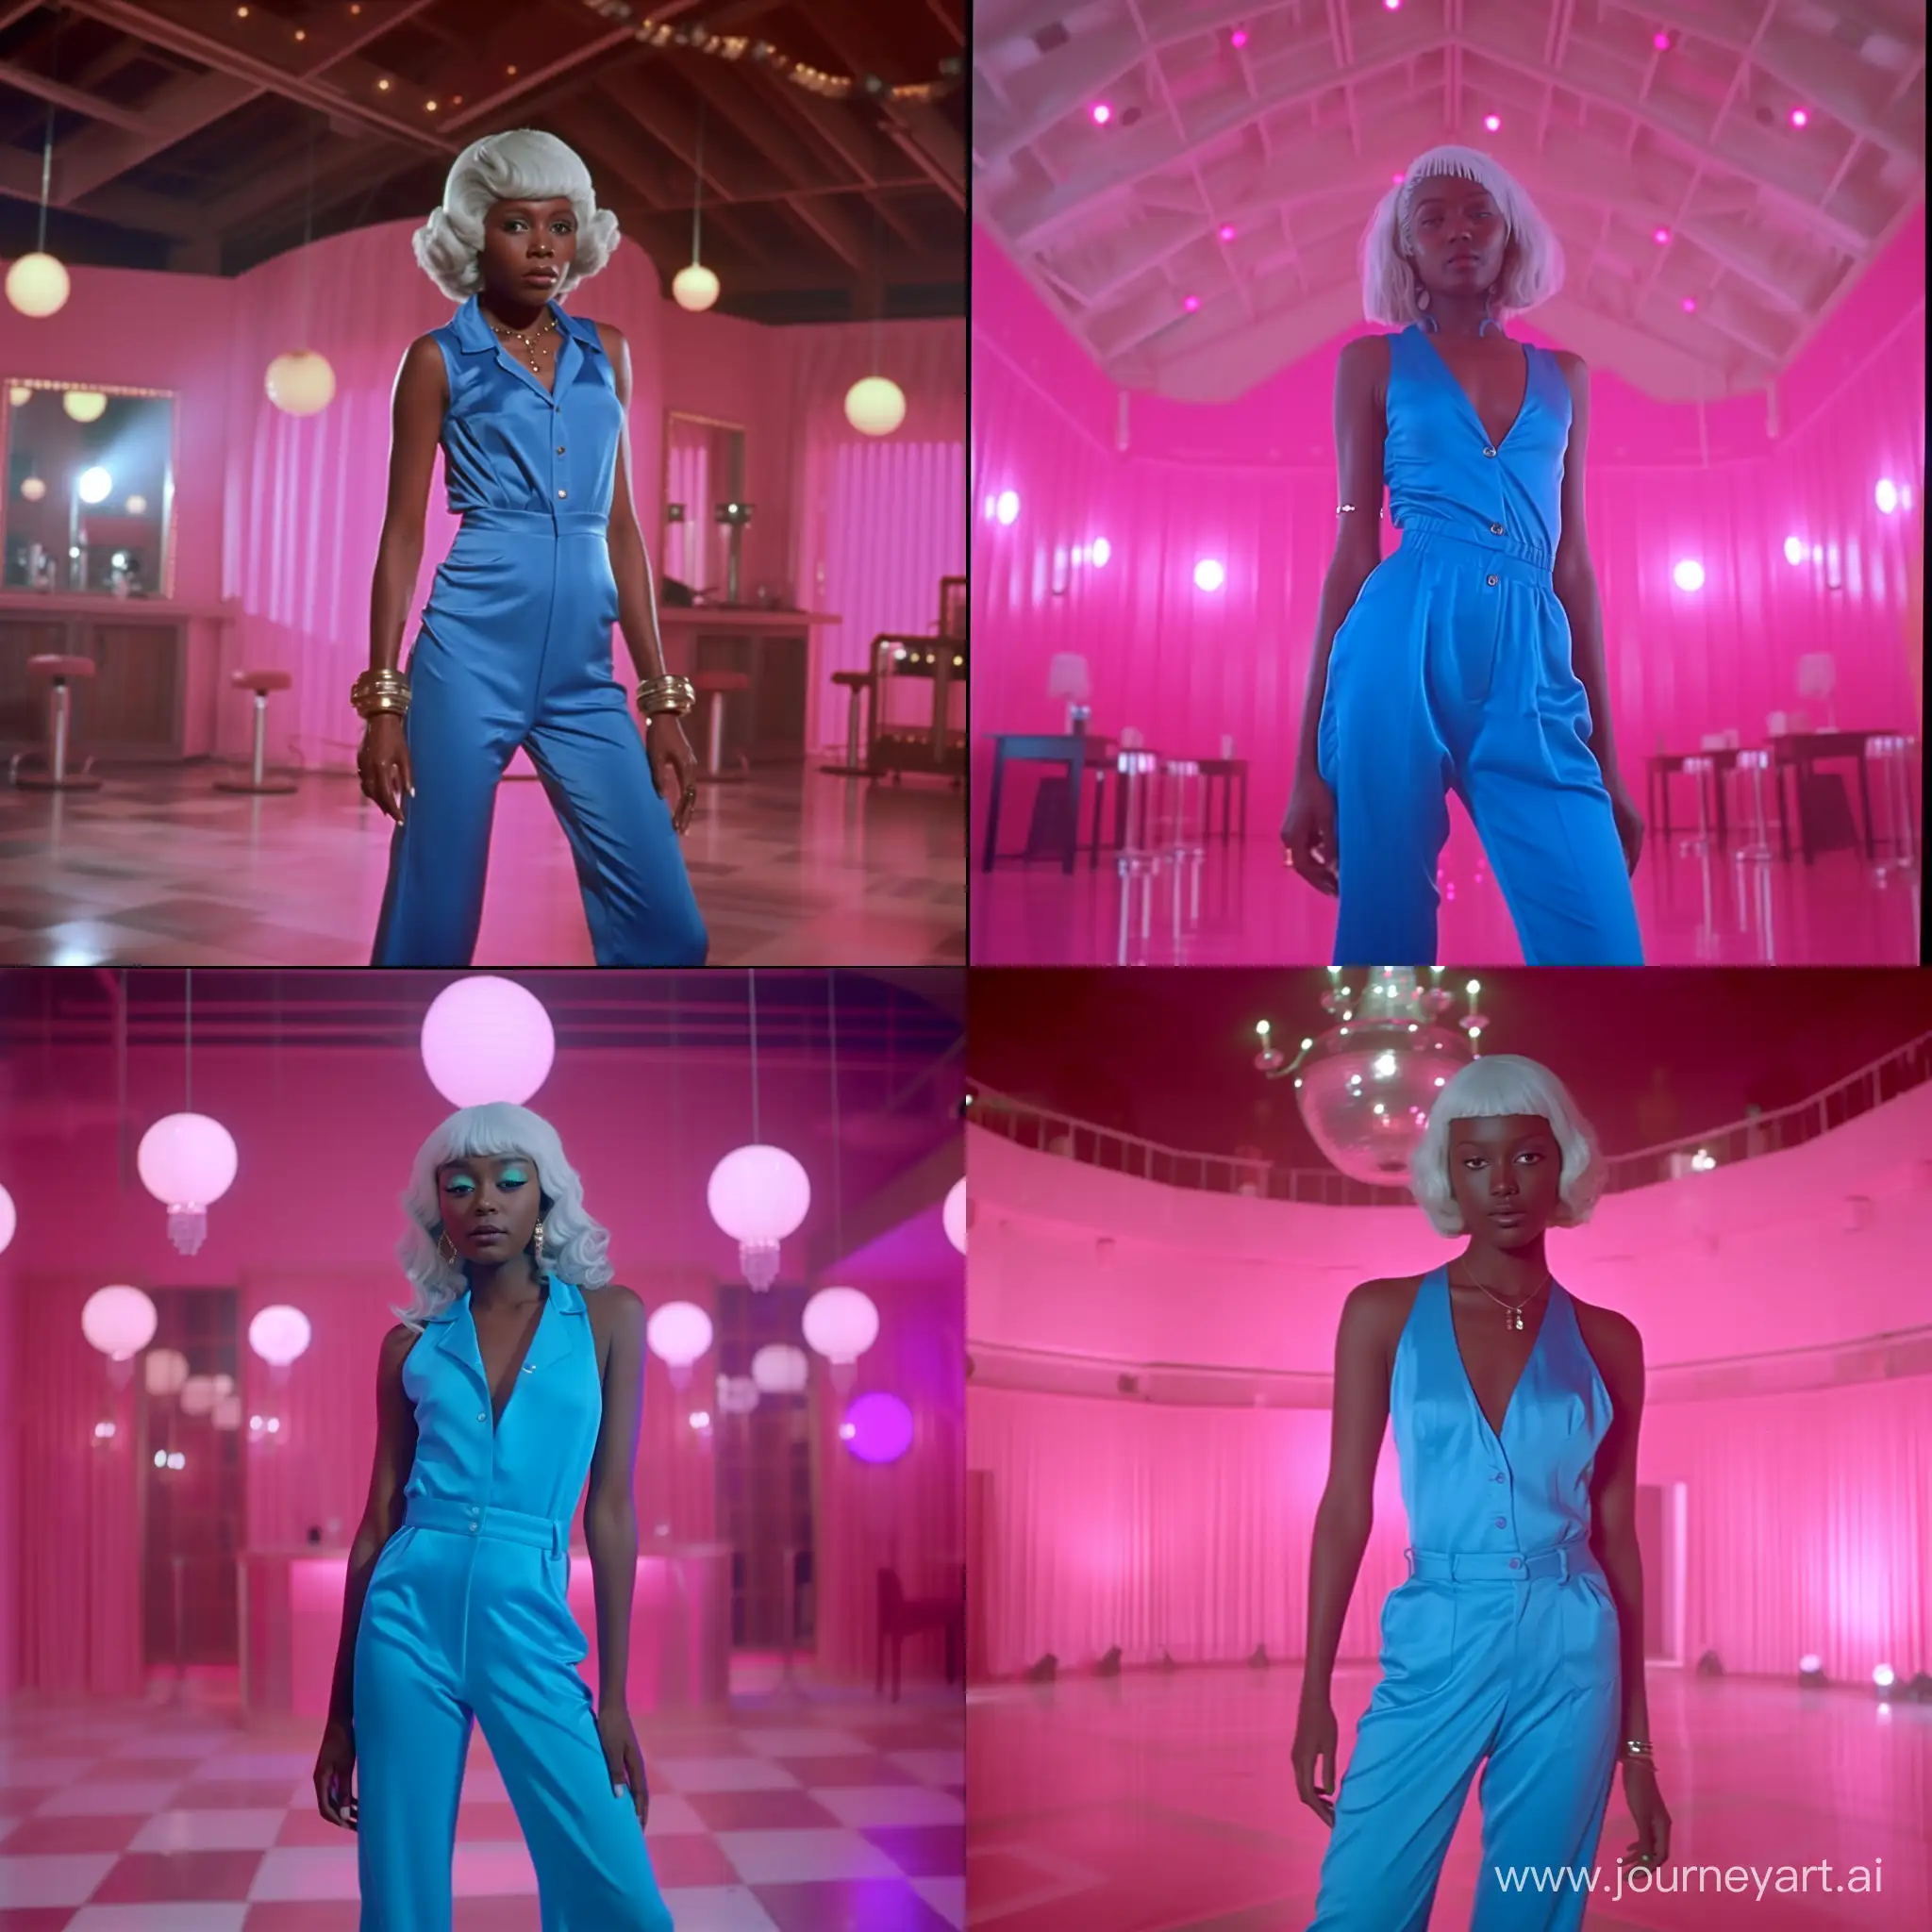 Stylish-Black-Woman-in-Blue-Jumpsuit-Dancing-in-Retro-Disco-Hall